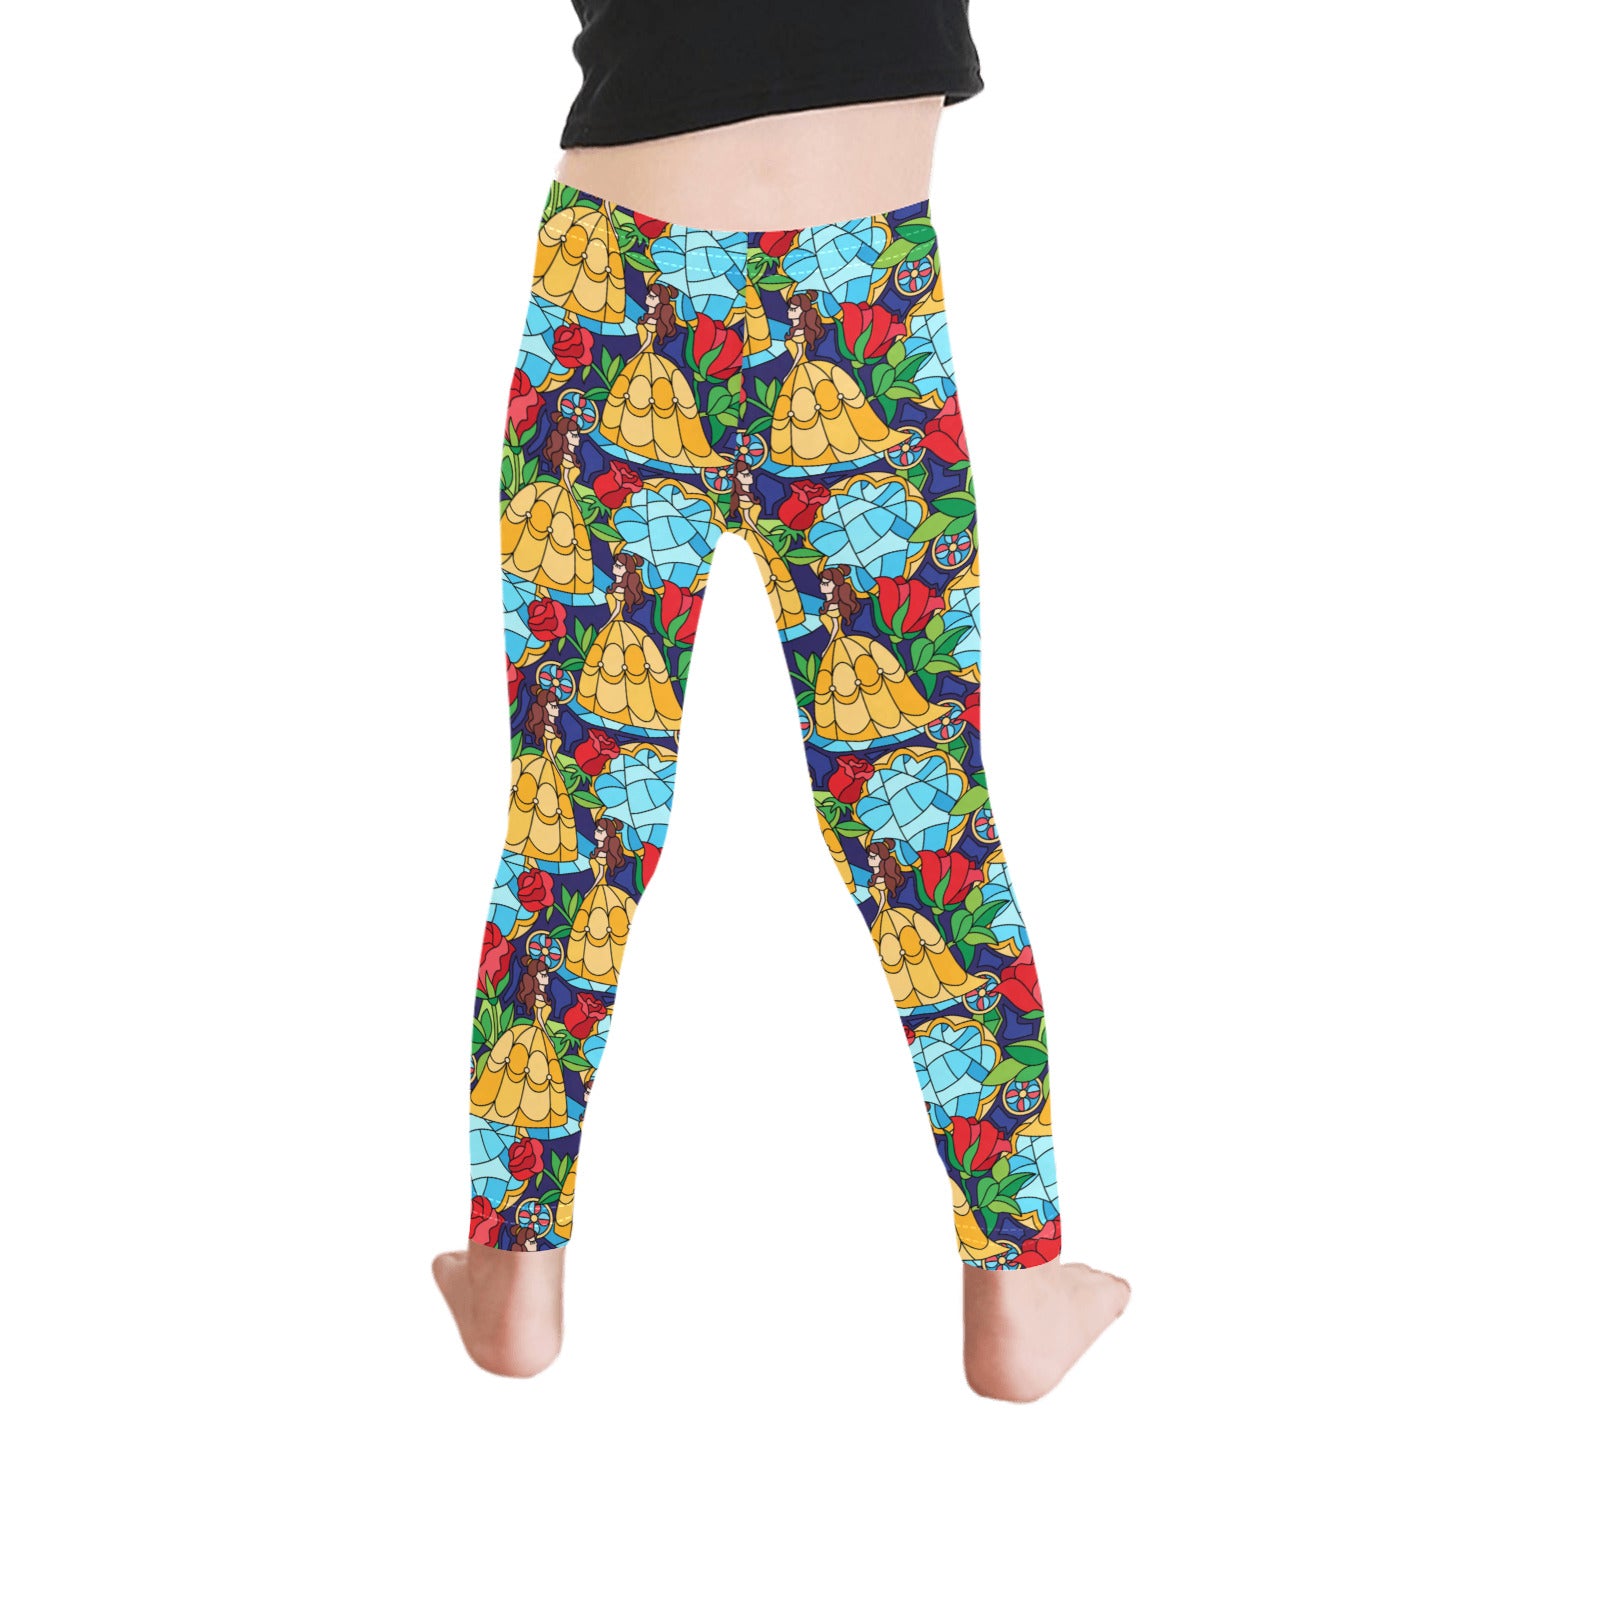 Stained Glass Kid's Leggings - Ambrie